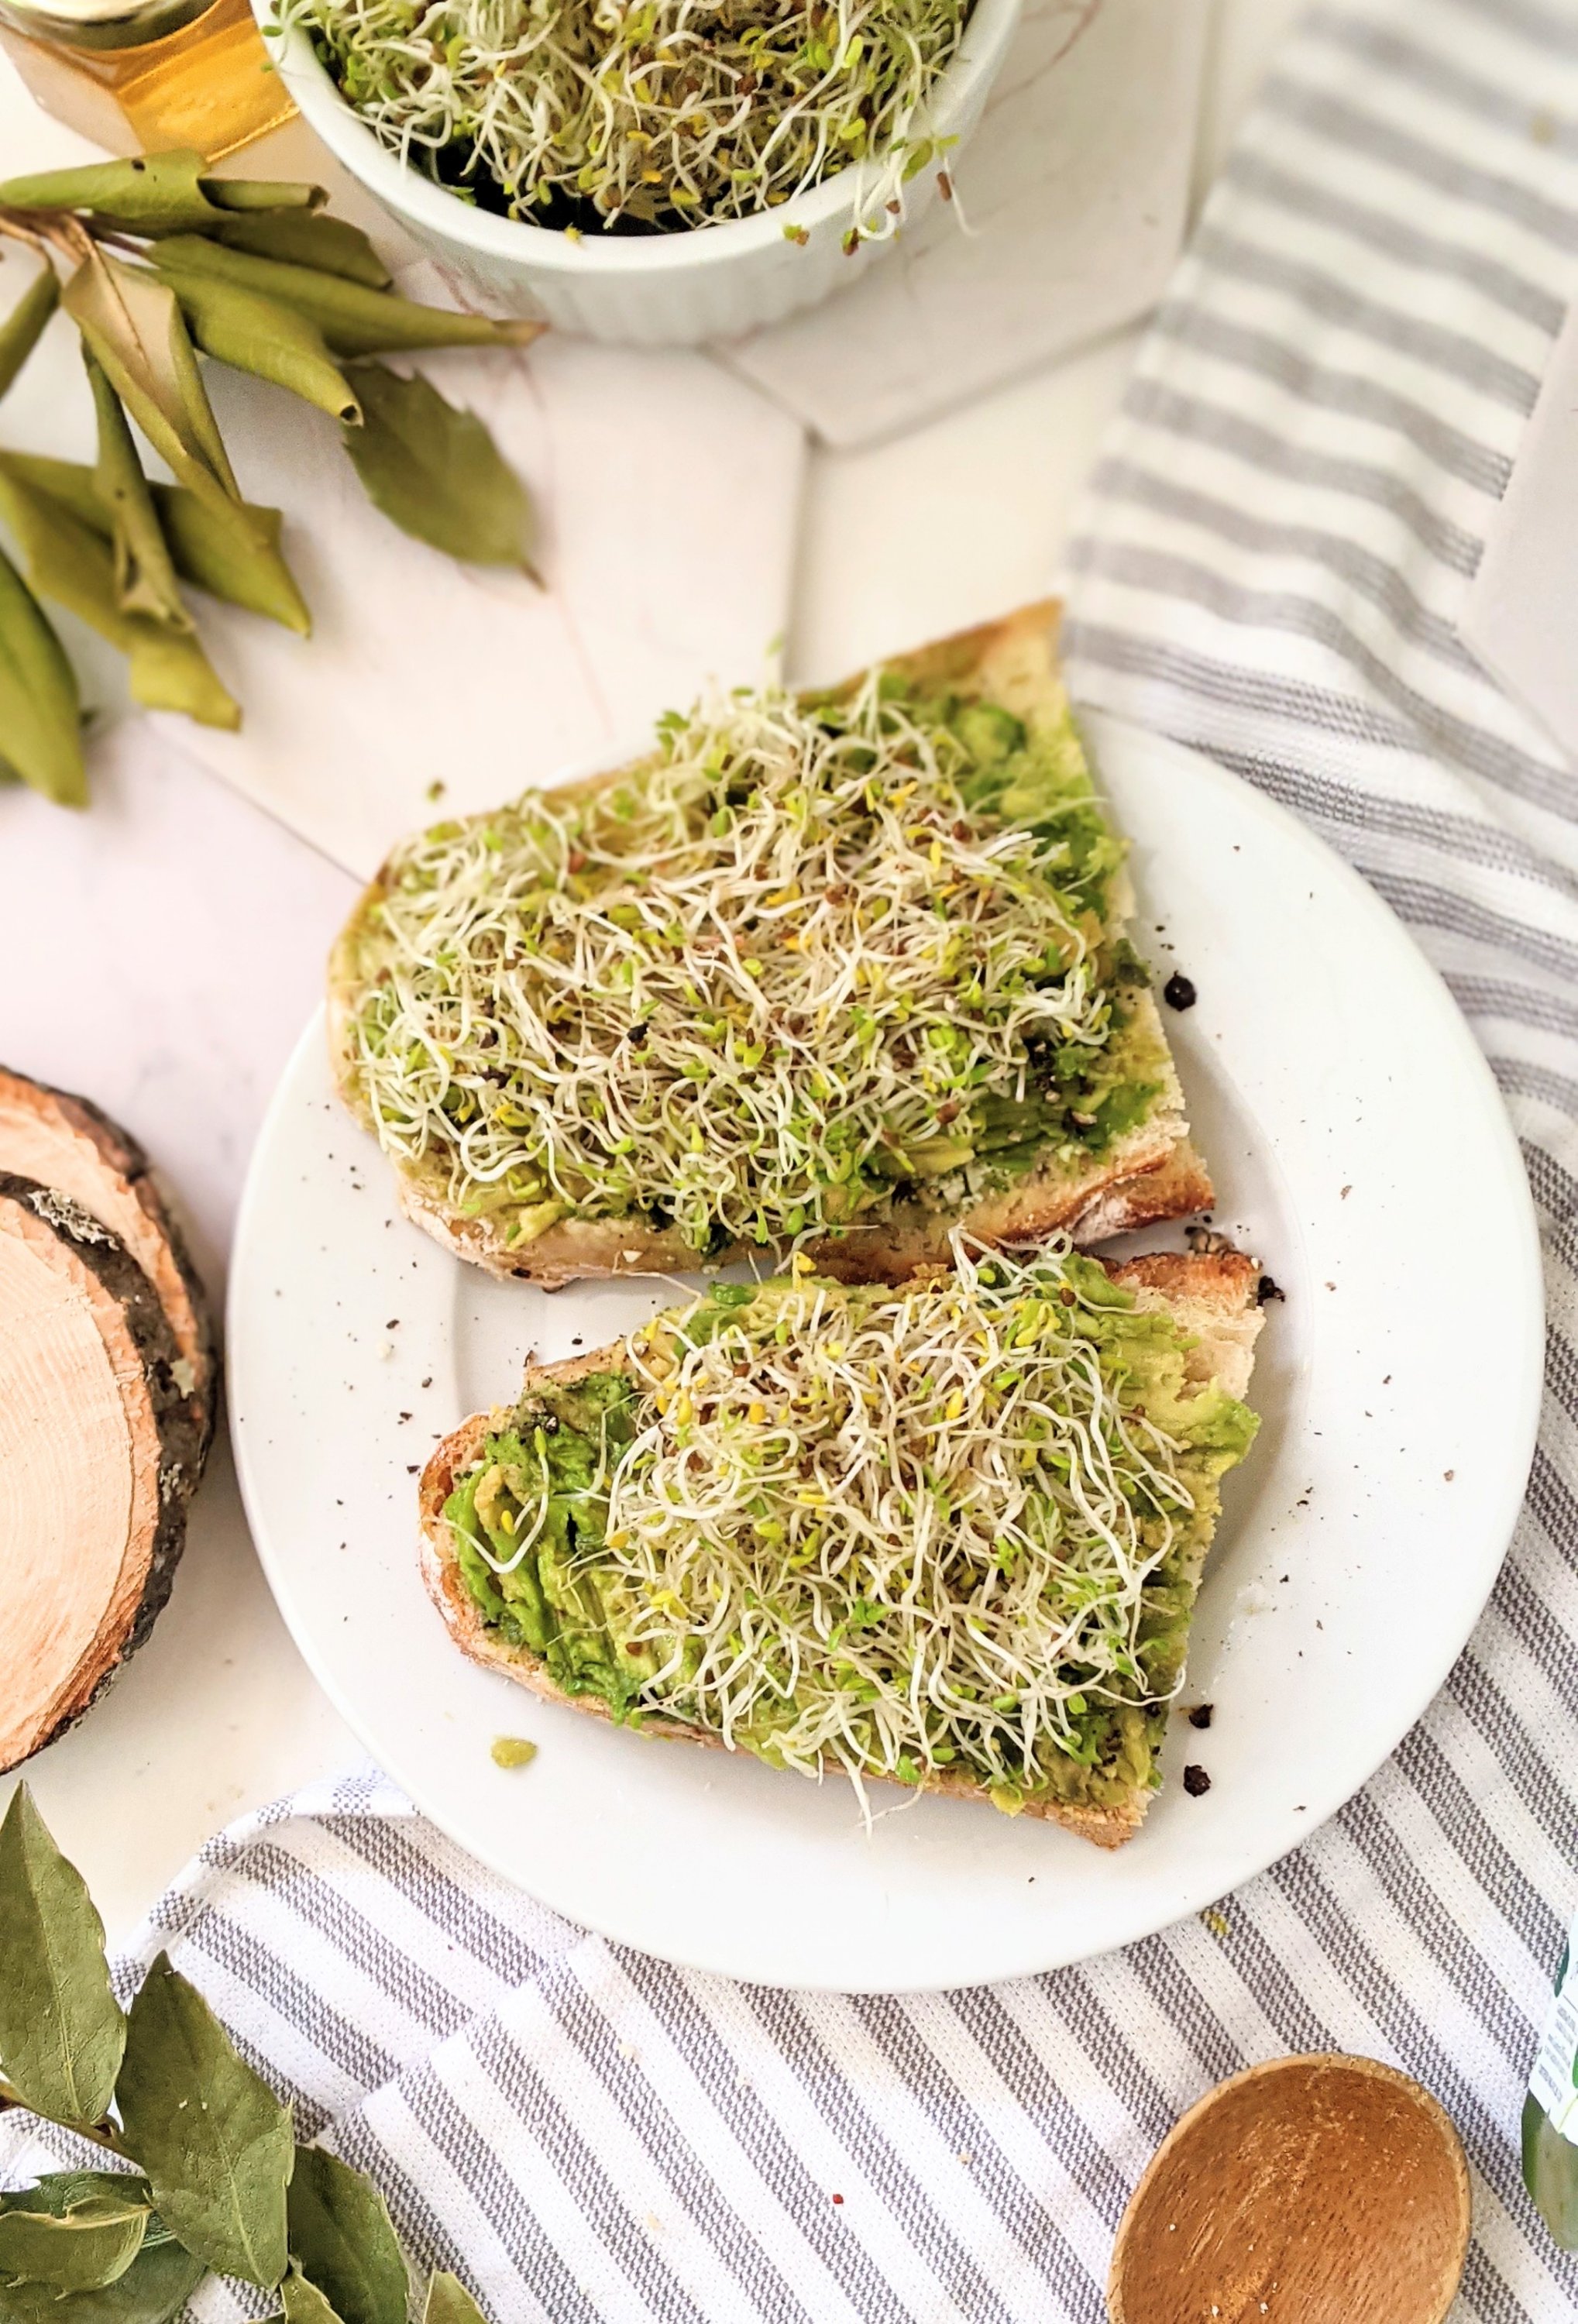 healthy sprout avocado toast with alfalfa sprouts recipe home grown sprouts recipes for breakfast or lunch easy crunchy avocado toast recipes with diy alfalfa sprouts grow your own in your kitchen